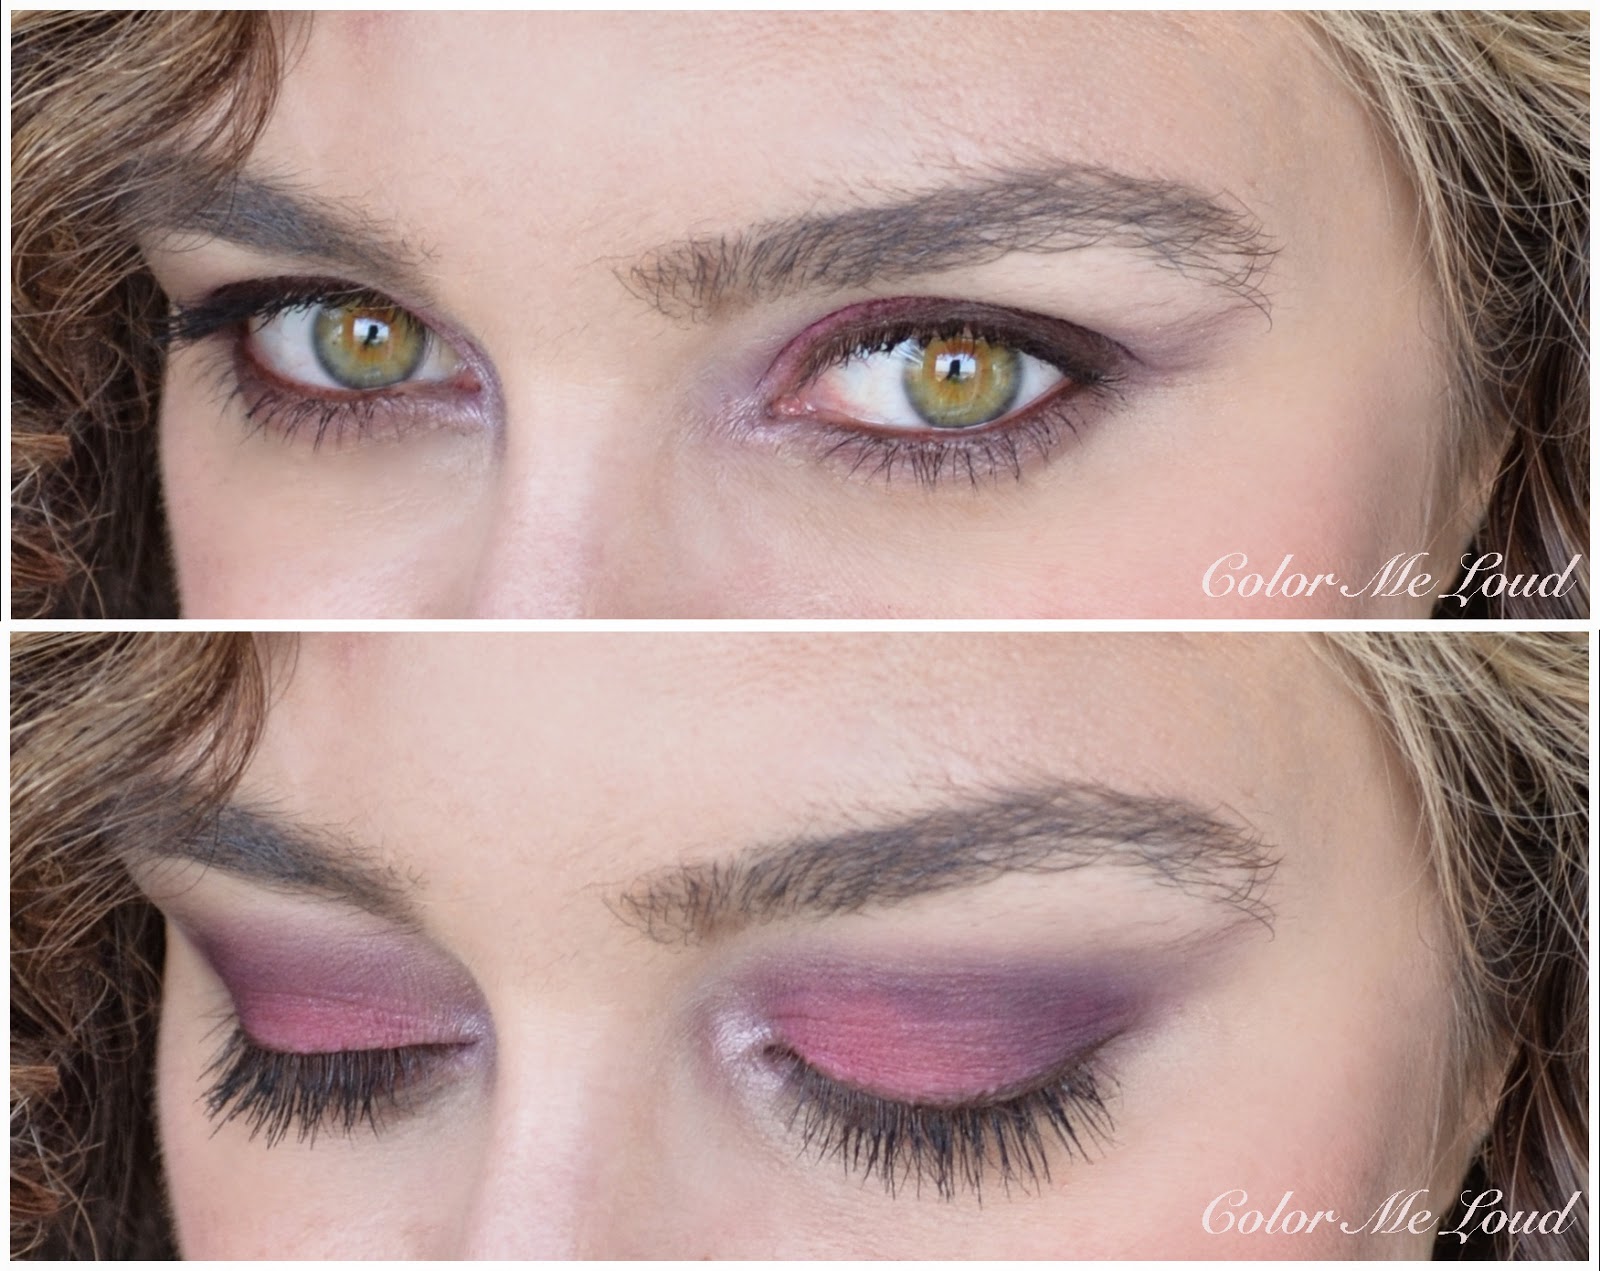 tobak Korn skam Chanel Ombre Essentielle #108 Exaltation and Rouge Coco Shine #94 Confident  from États Poétiques Collection for Fall 2014, Review, Swatch & FOTD |  Color Me Loud